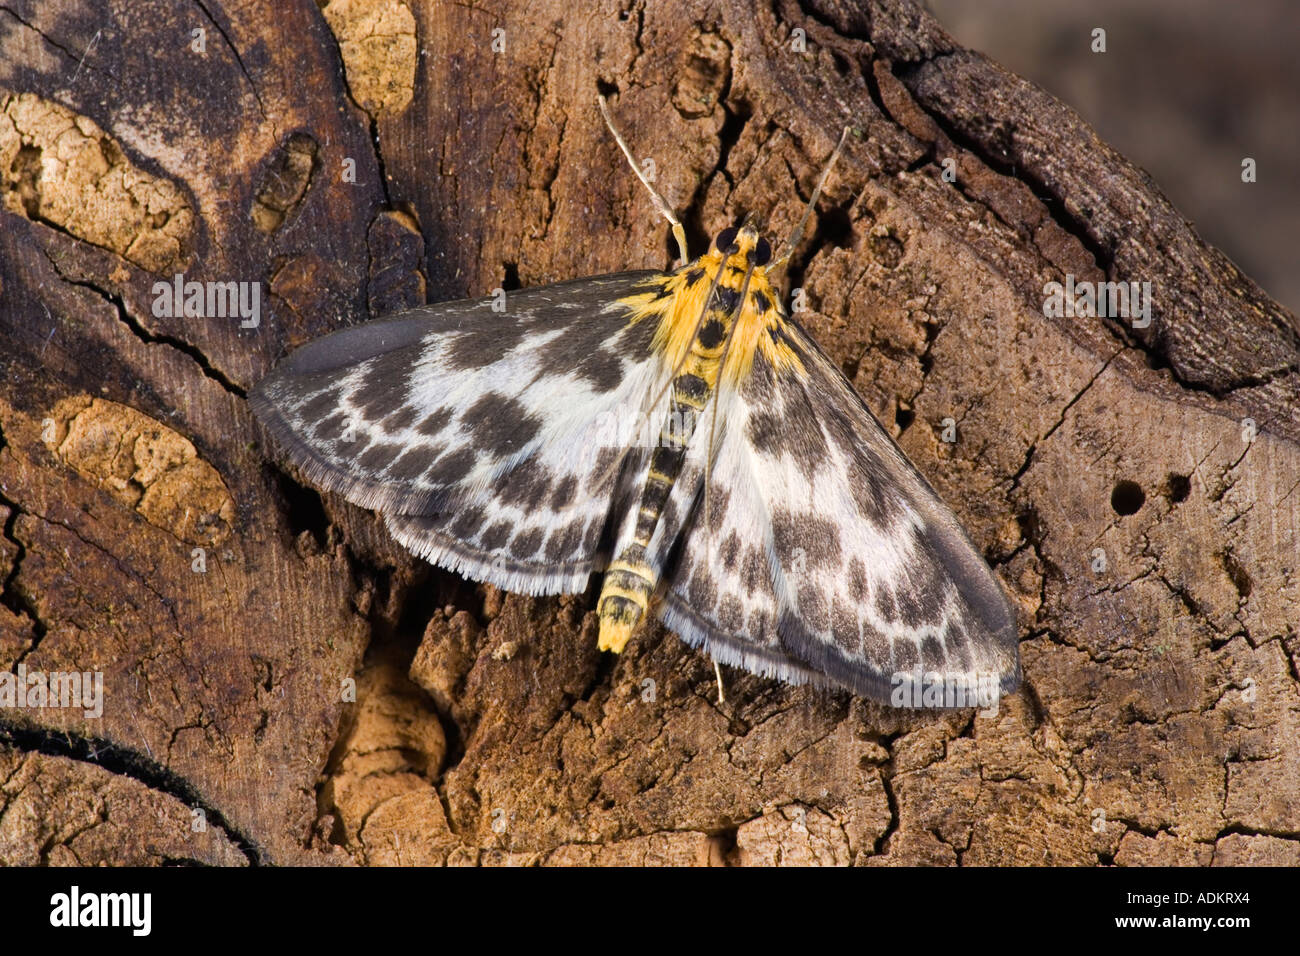 Small Magpie Eurrhypara hortulata at rest on log with wings open showing markings and detail Potton Bedfordshire Stock Photo